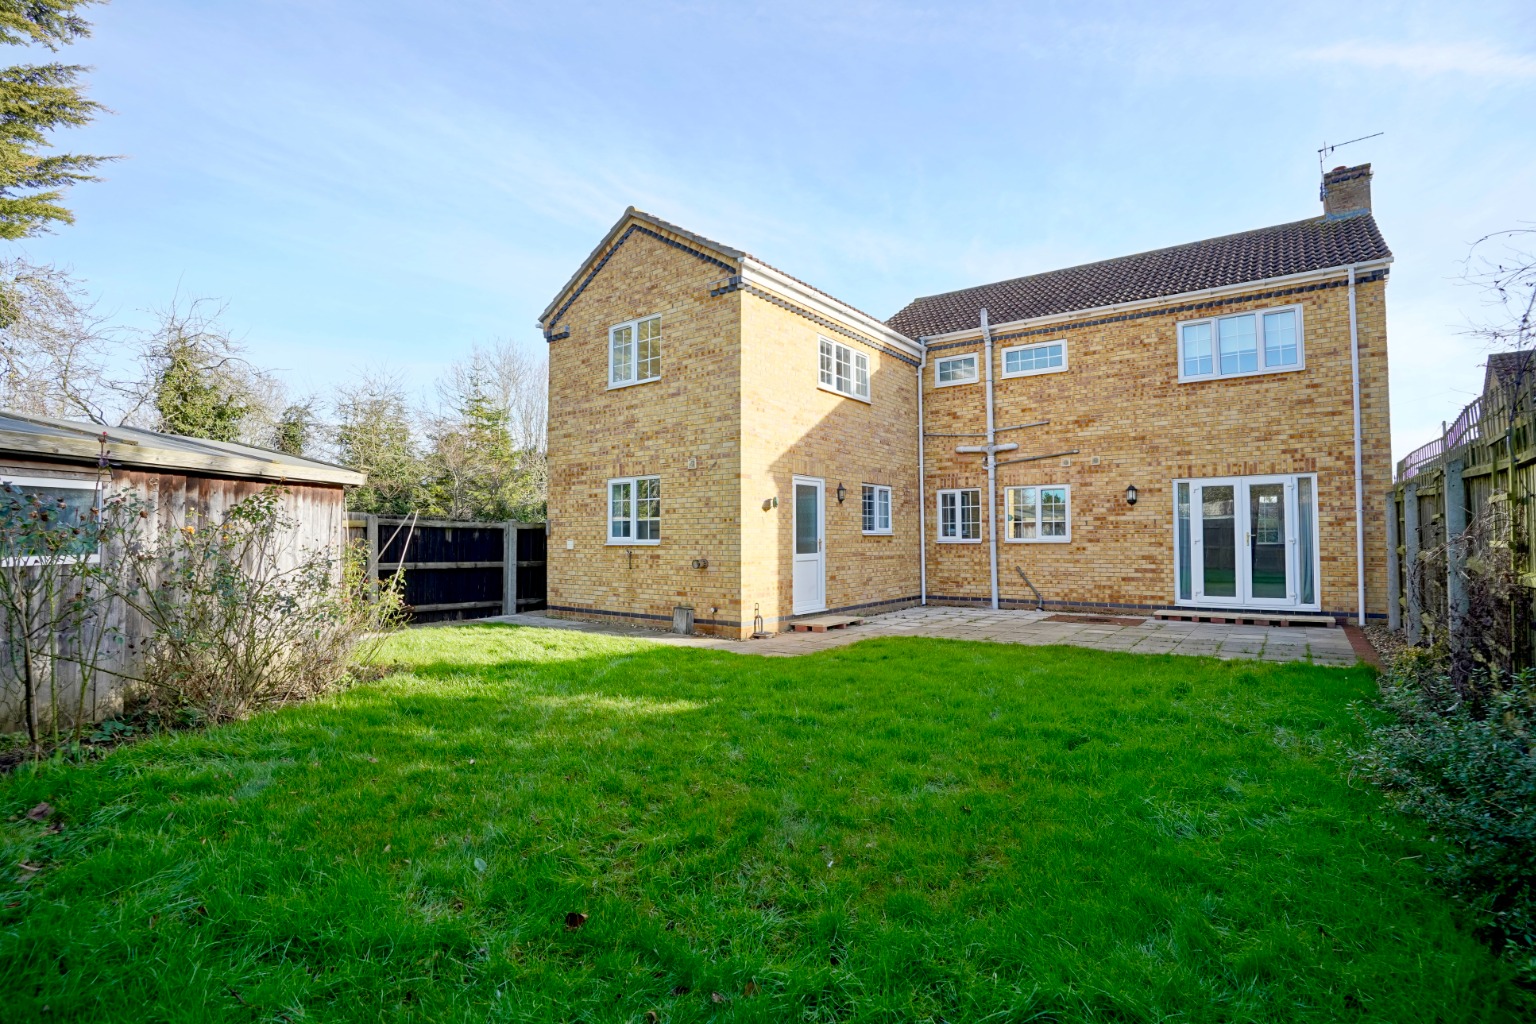 This remarkable detached home is on the market for the first time since being built by the current owners, around 17 years ago. The property was individually built in a non-estate location, bringing a great degree of privacy to be enjoyed by families...